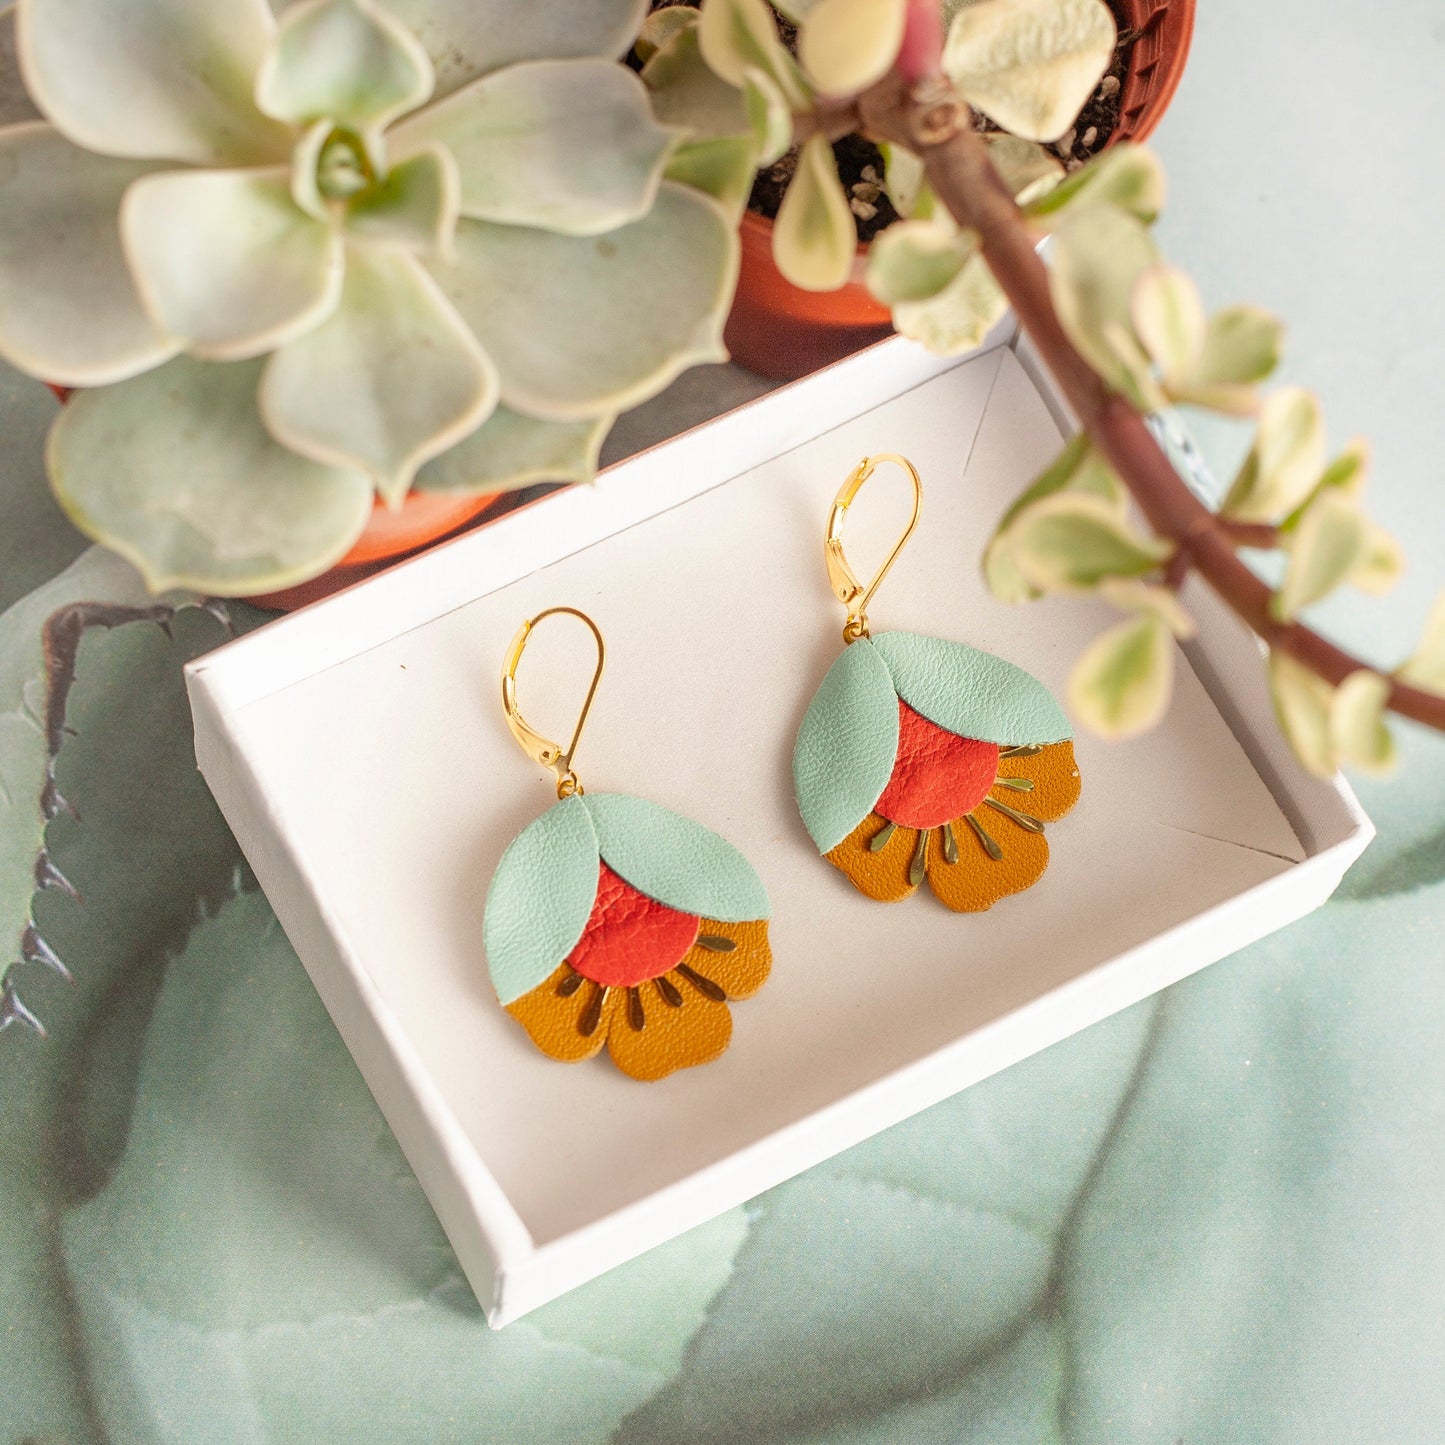 Mint green, red and ocher yellow cherry blossom earrings